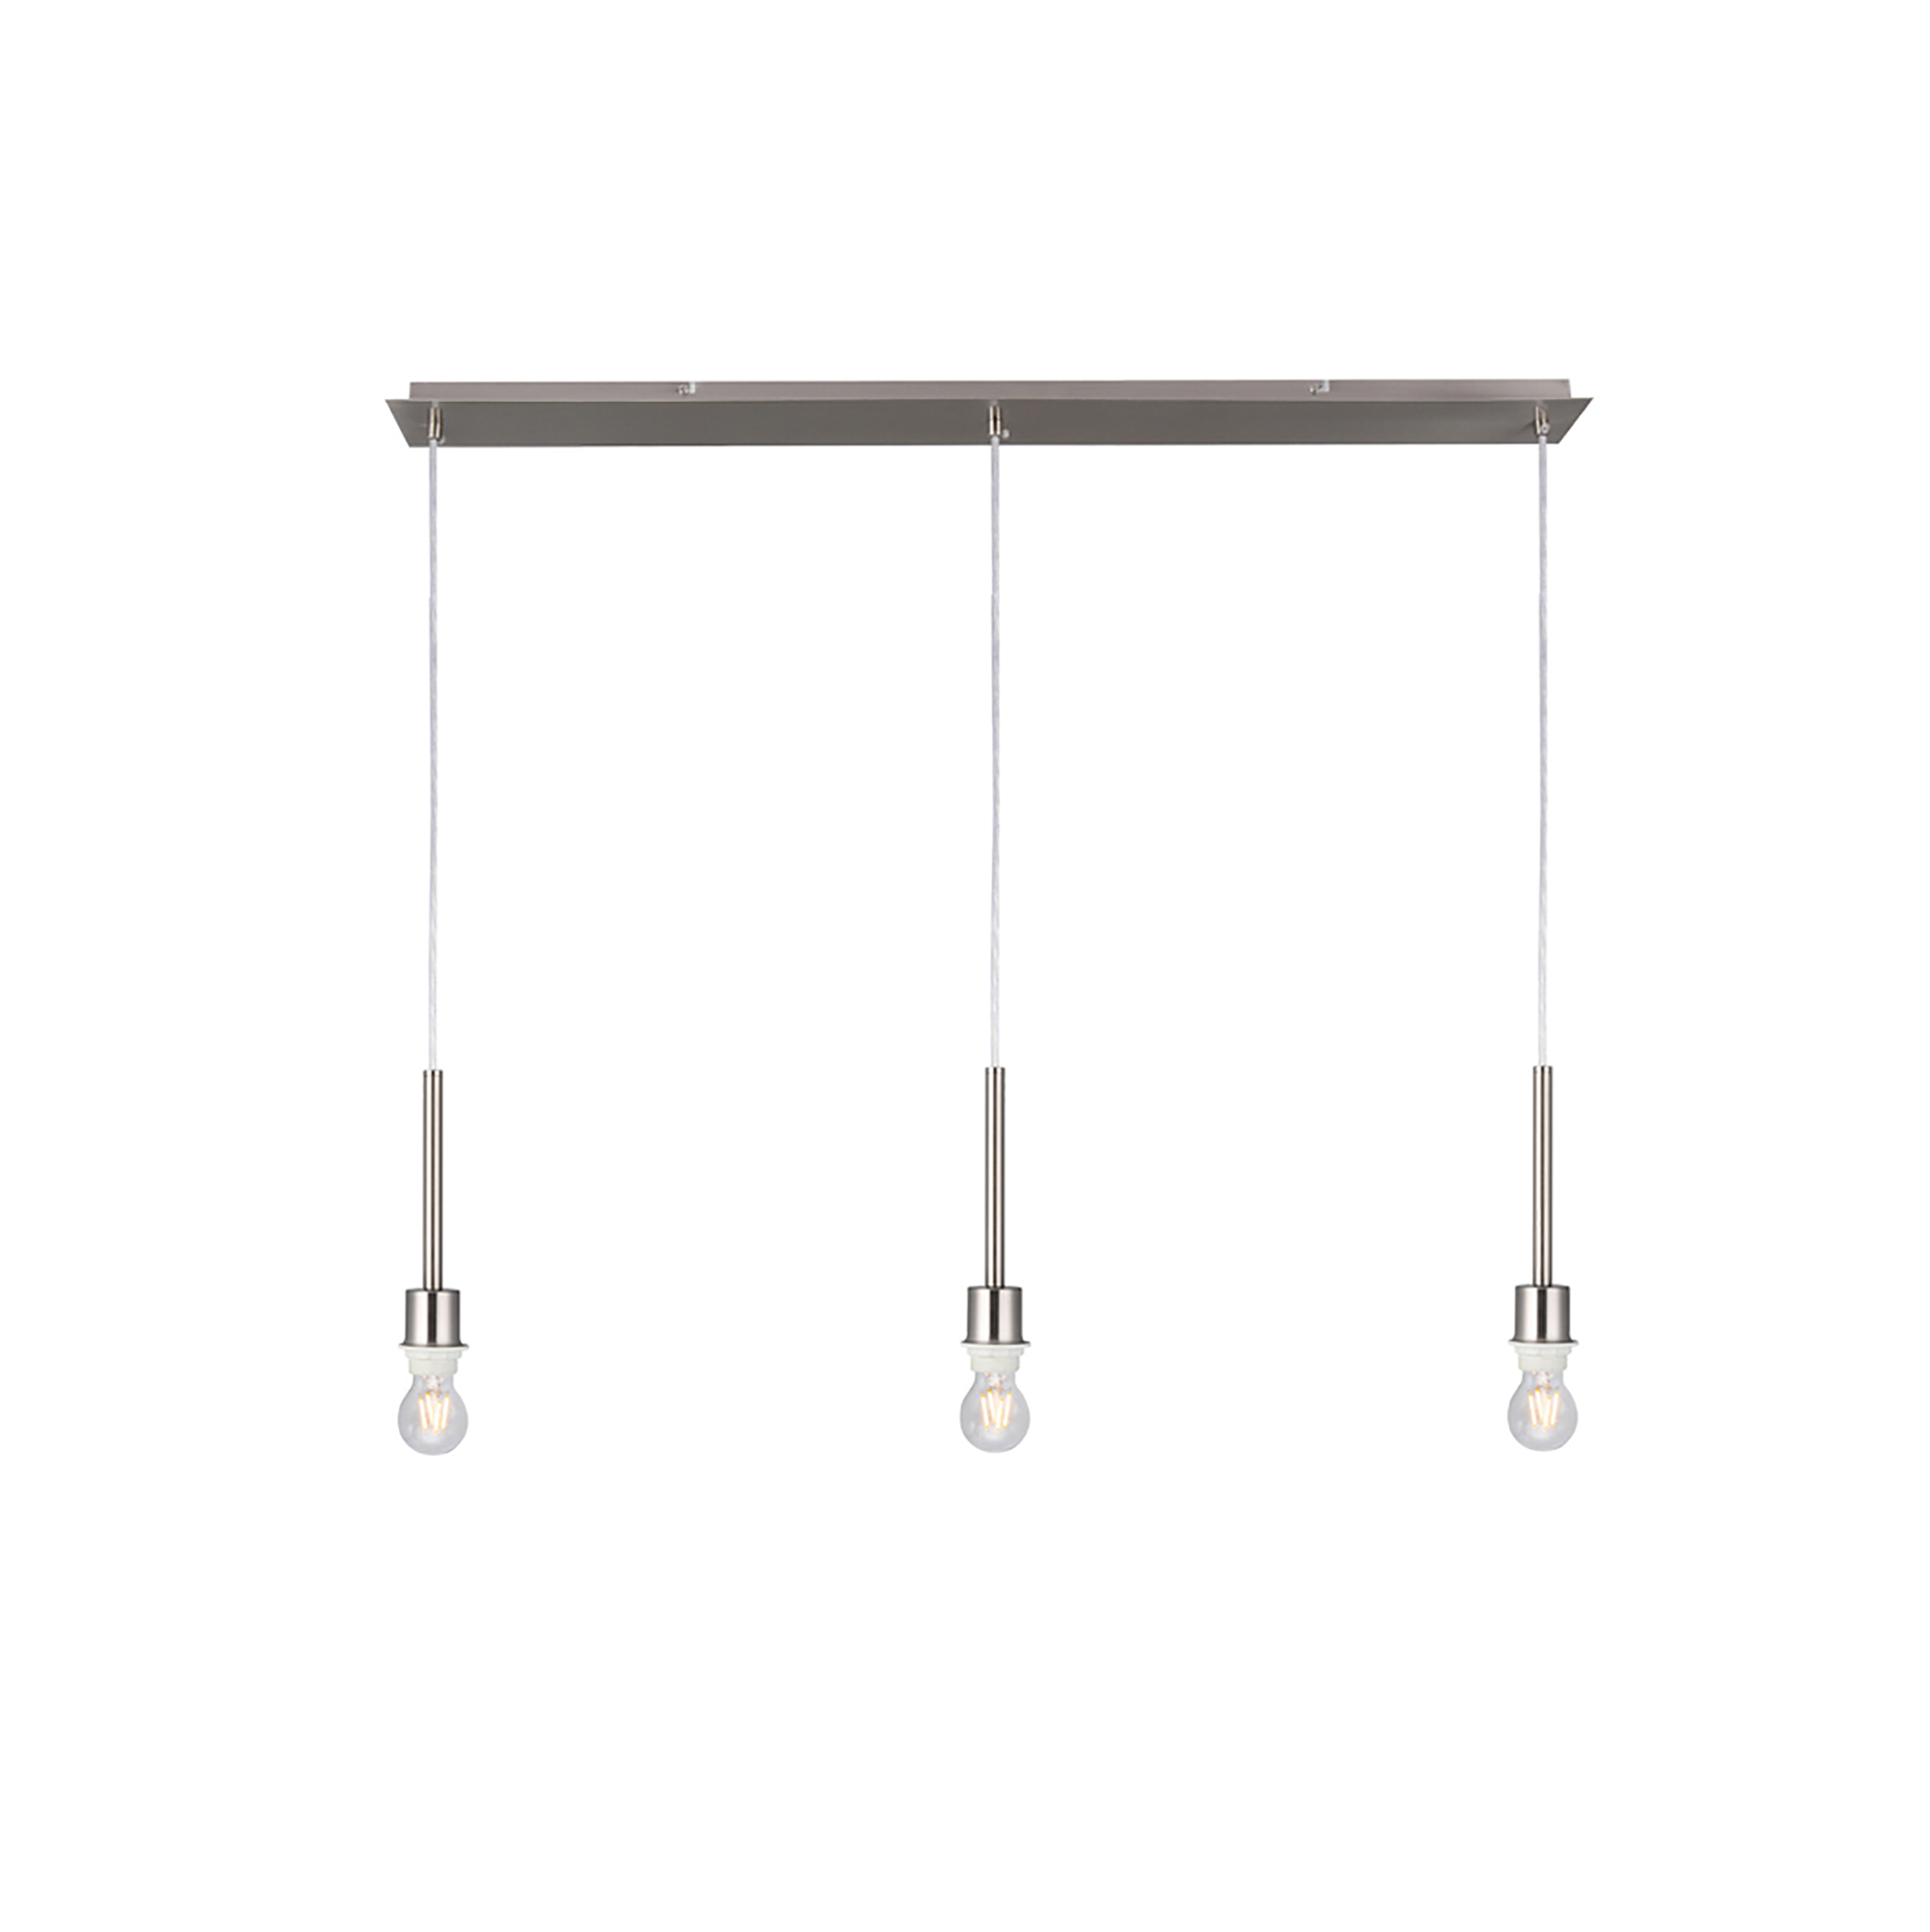 Baymont SN BL Ceiling Lights Deco Linear Fittings